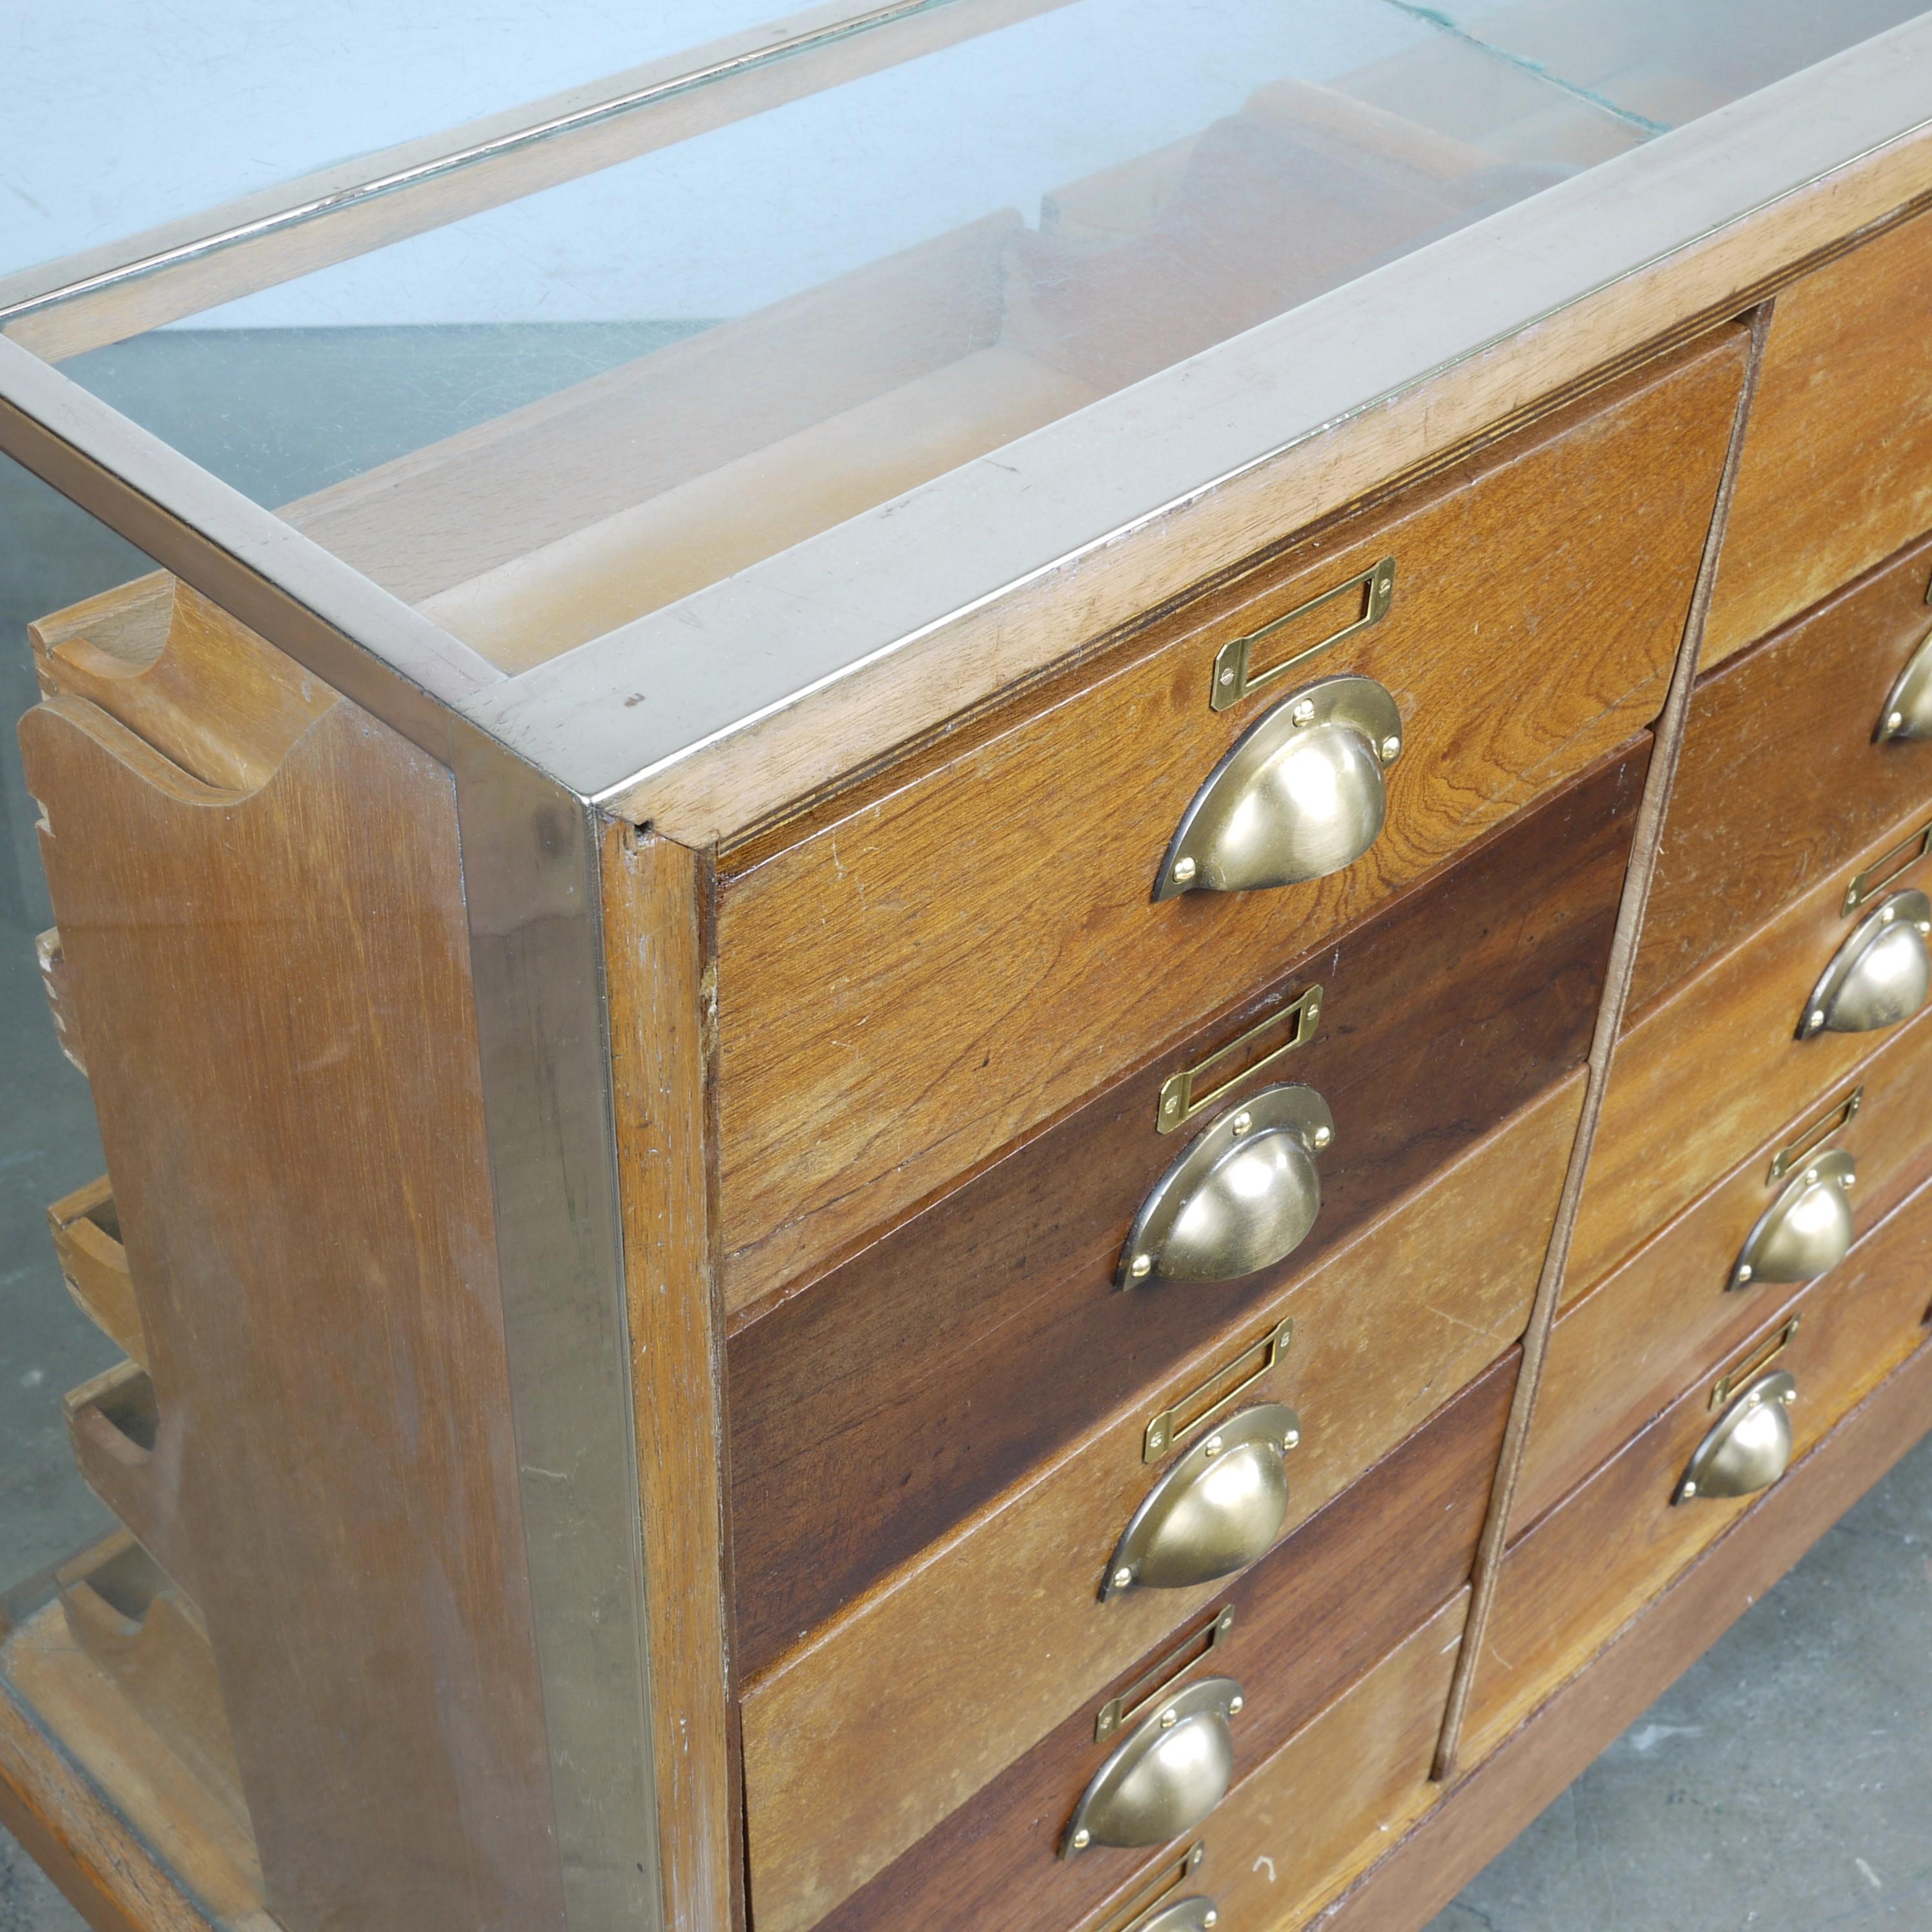 1950s vintage brass frame haberdashery cabinet, chest of drawers, storage cabinet. Sourced from a shop in North Yorkshire this is a very special original haberdashery cabinet with the double brass banding on the glass top and a complete brass frame.